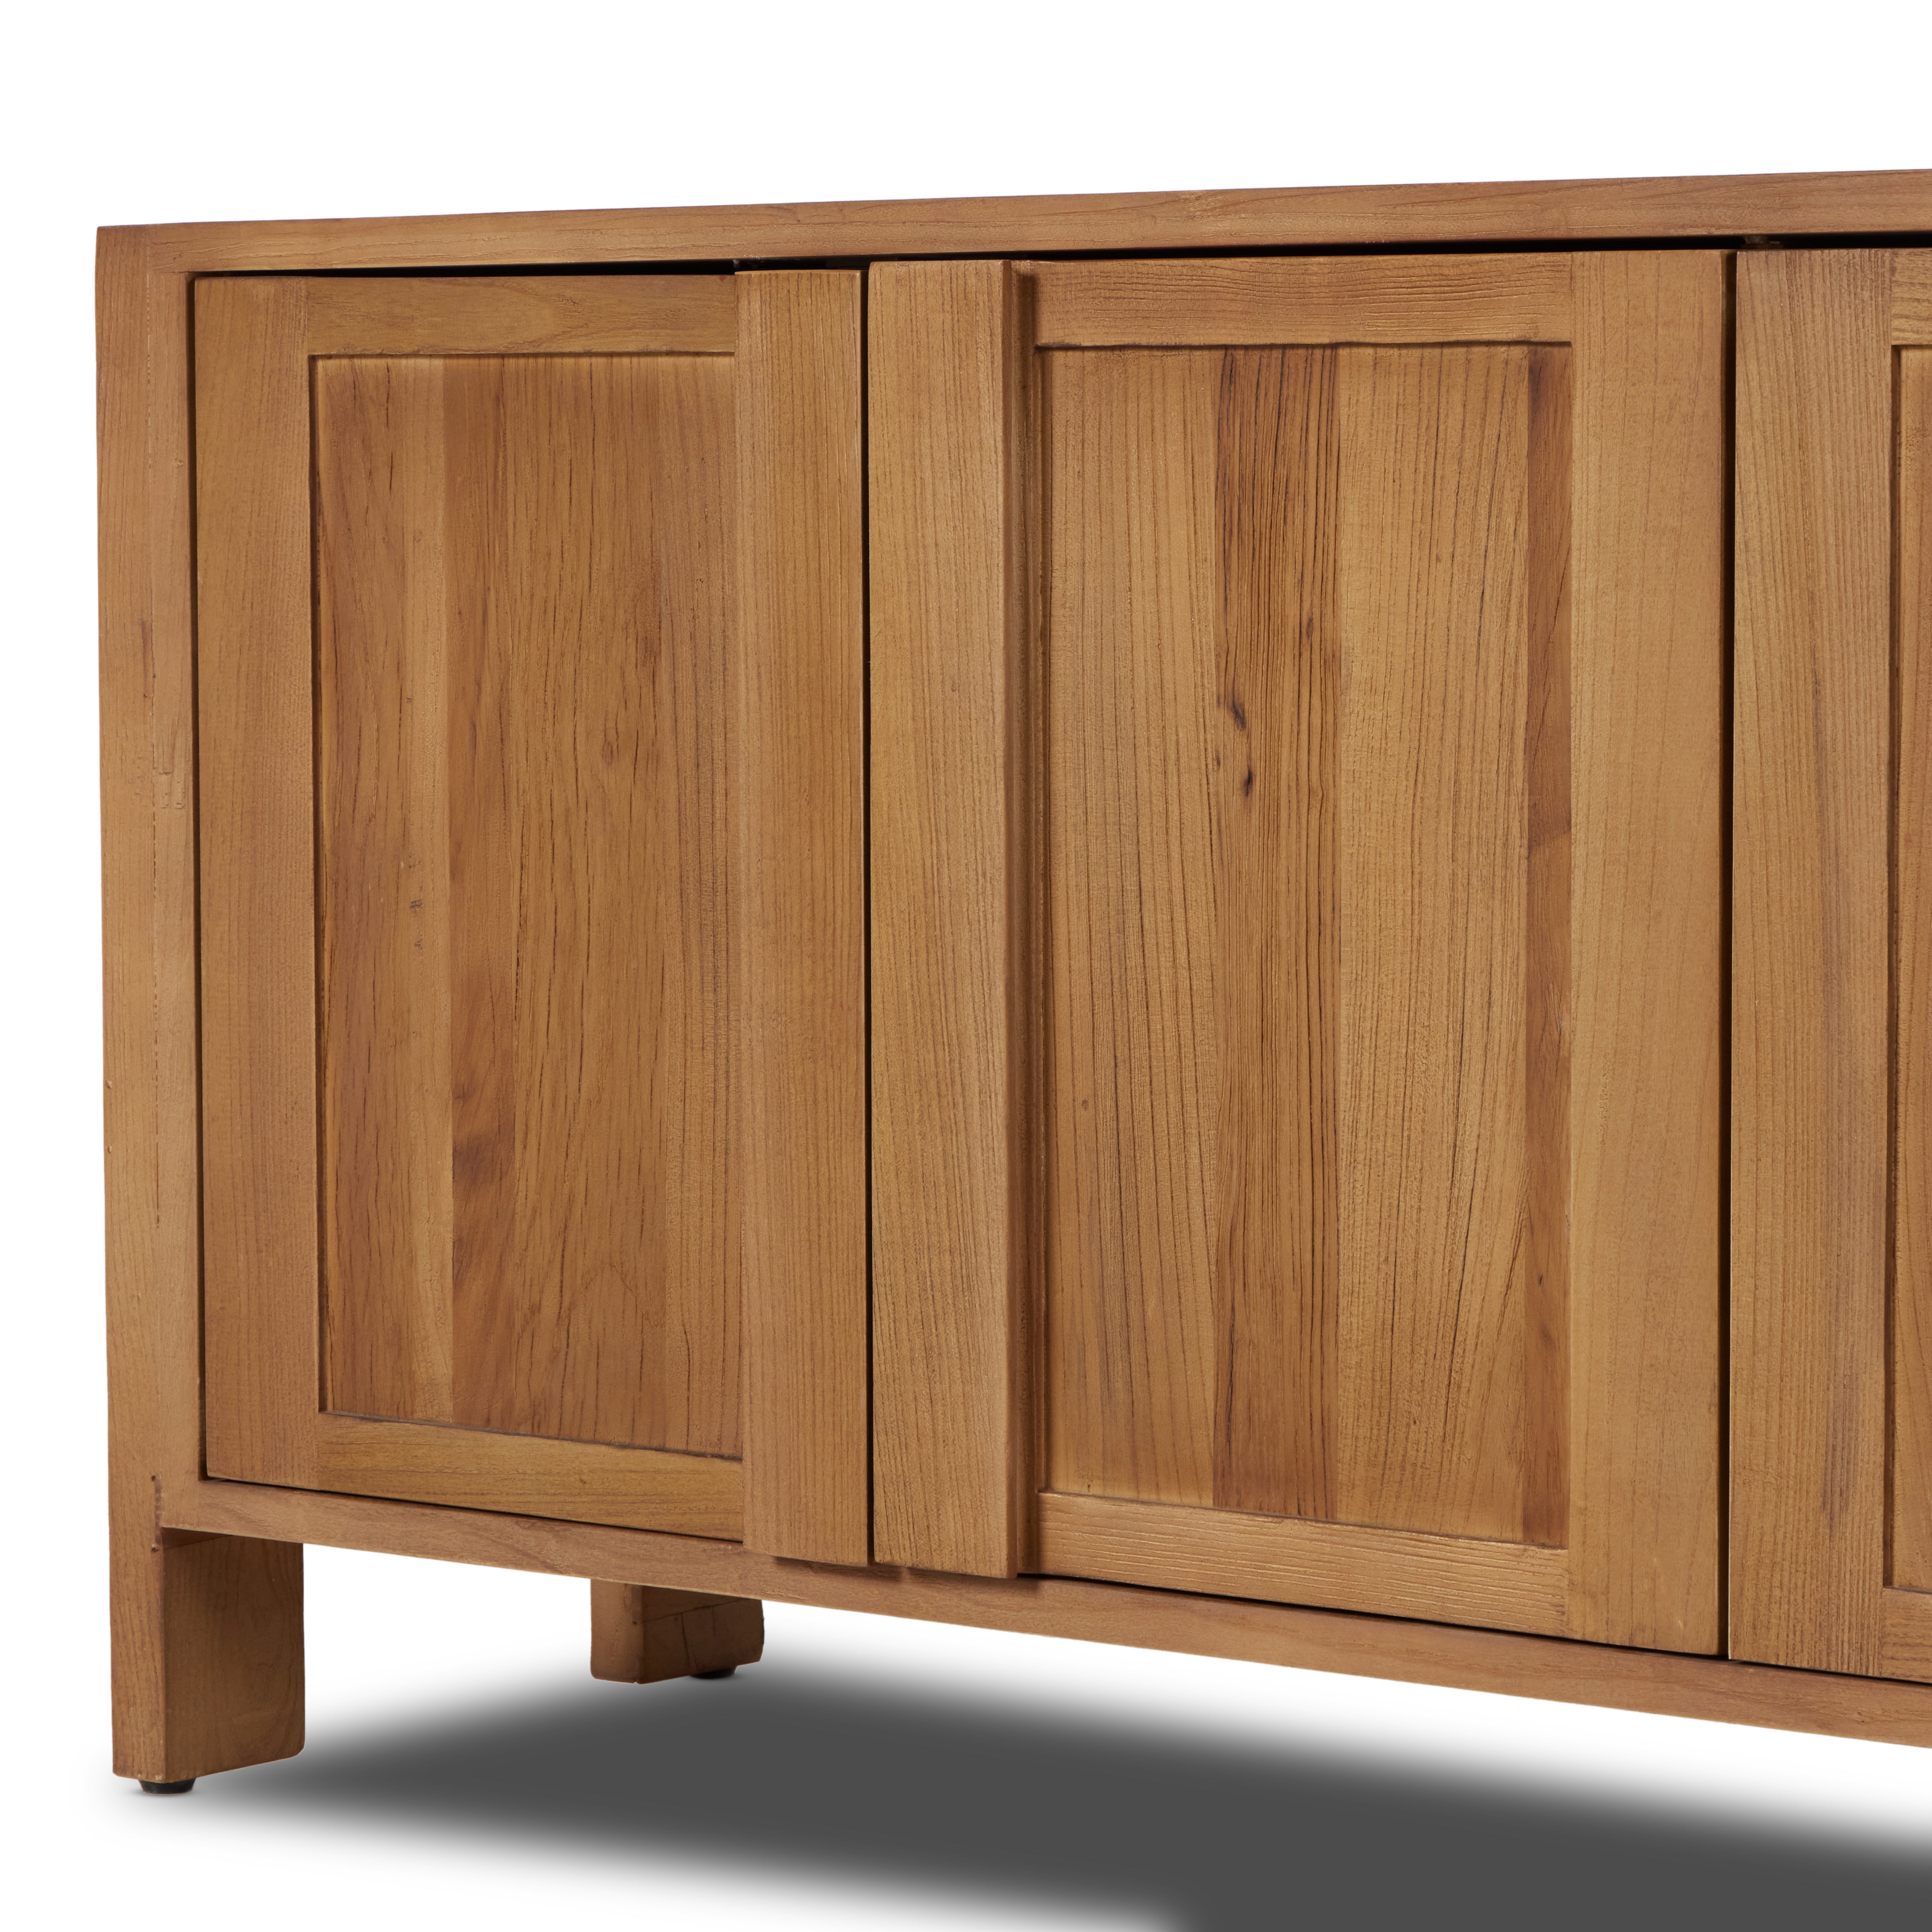 Inspired by Swedish folk design, natural elm crafts the frame and panel structure of this sideboard. Designed without hardware, the raised panels of the doors have a cutout to serve as handles, offering a clean appearance that offers practical function. Amethyst Home provides interior design, new construction, custom furniture, and area rugs in the Laguna Beach metro area.